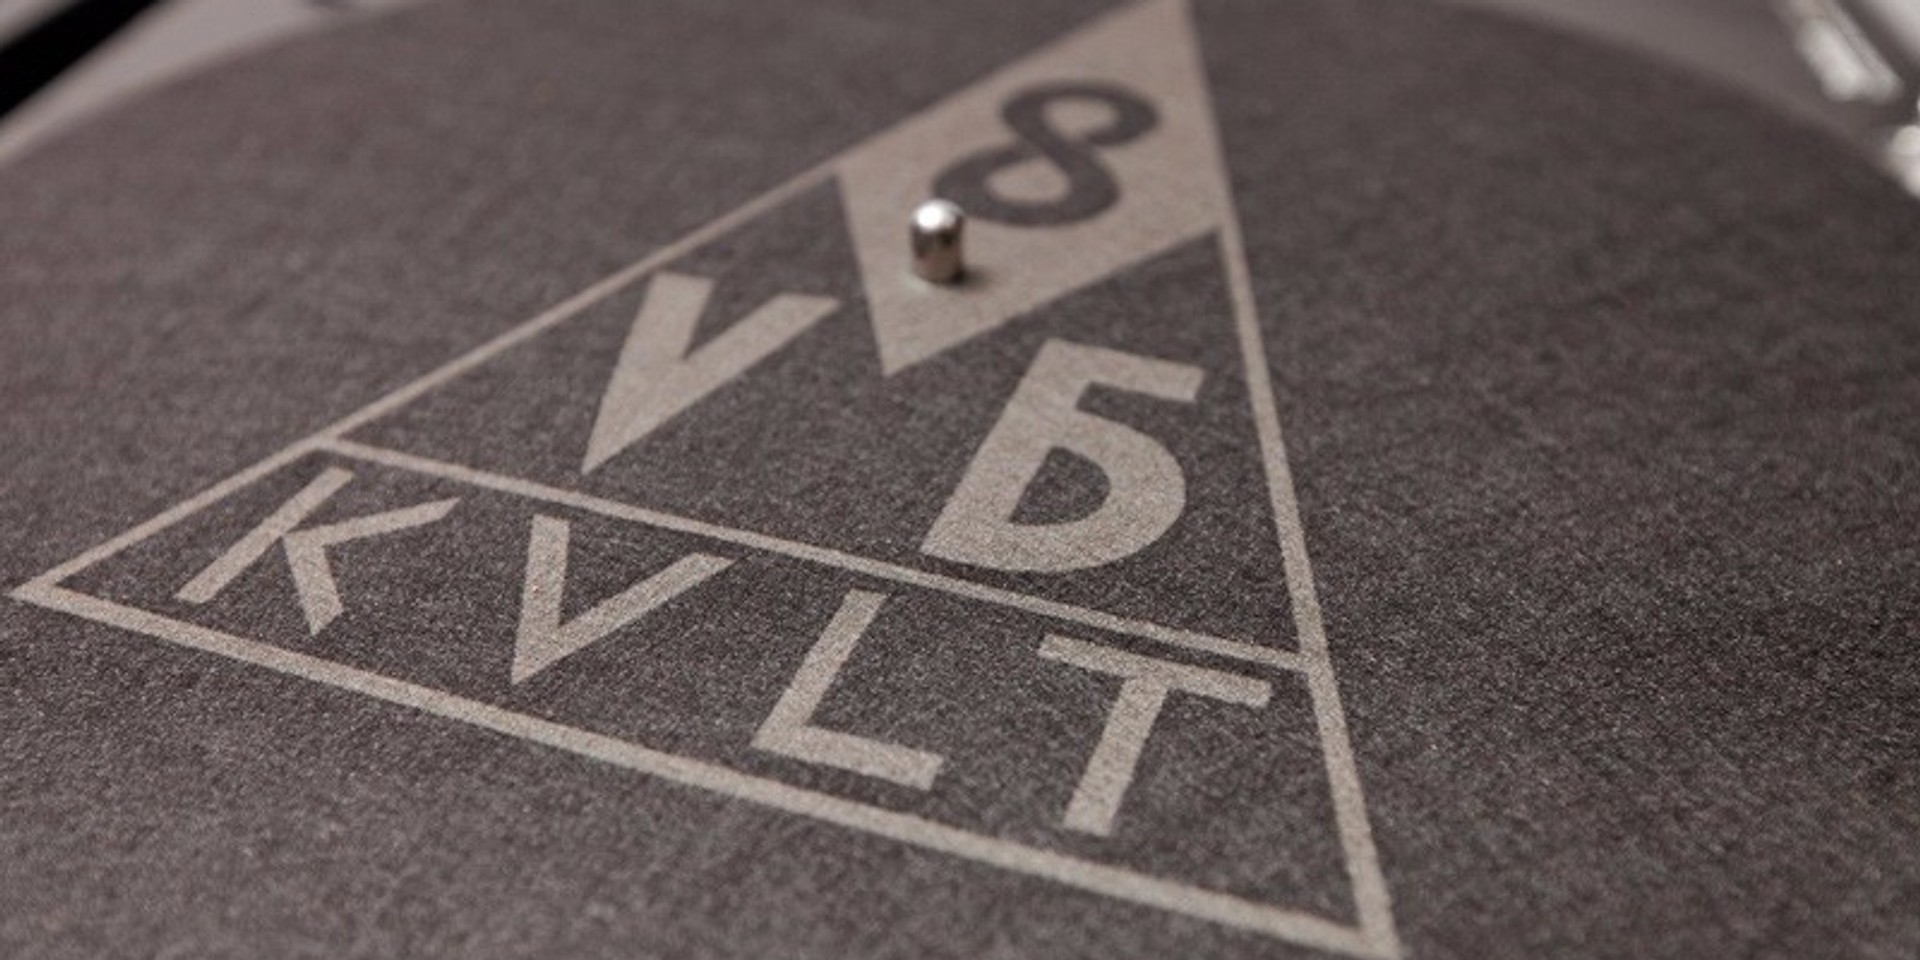 The remarkable rise of Shanghai label SVBKVLT, and their subculture of substance